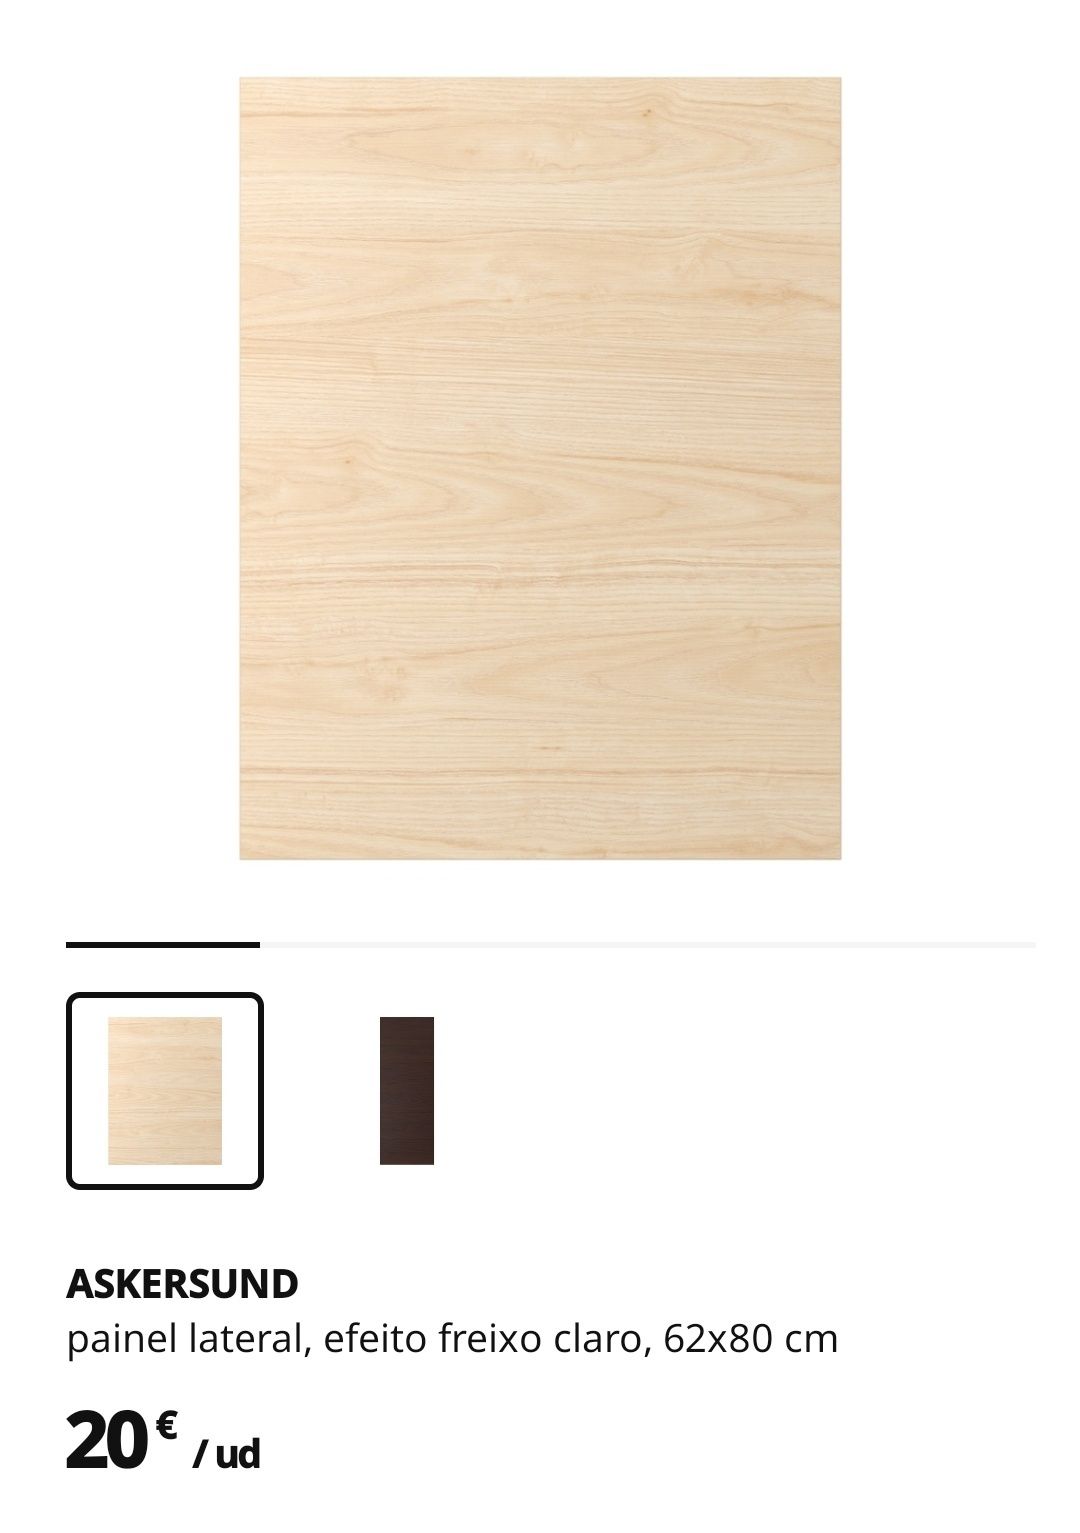 Askersund painel lateral IKEA 62x80cm